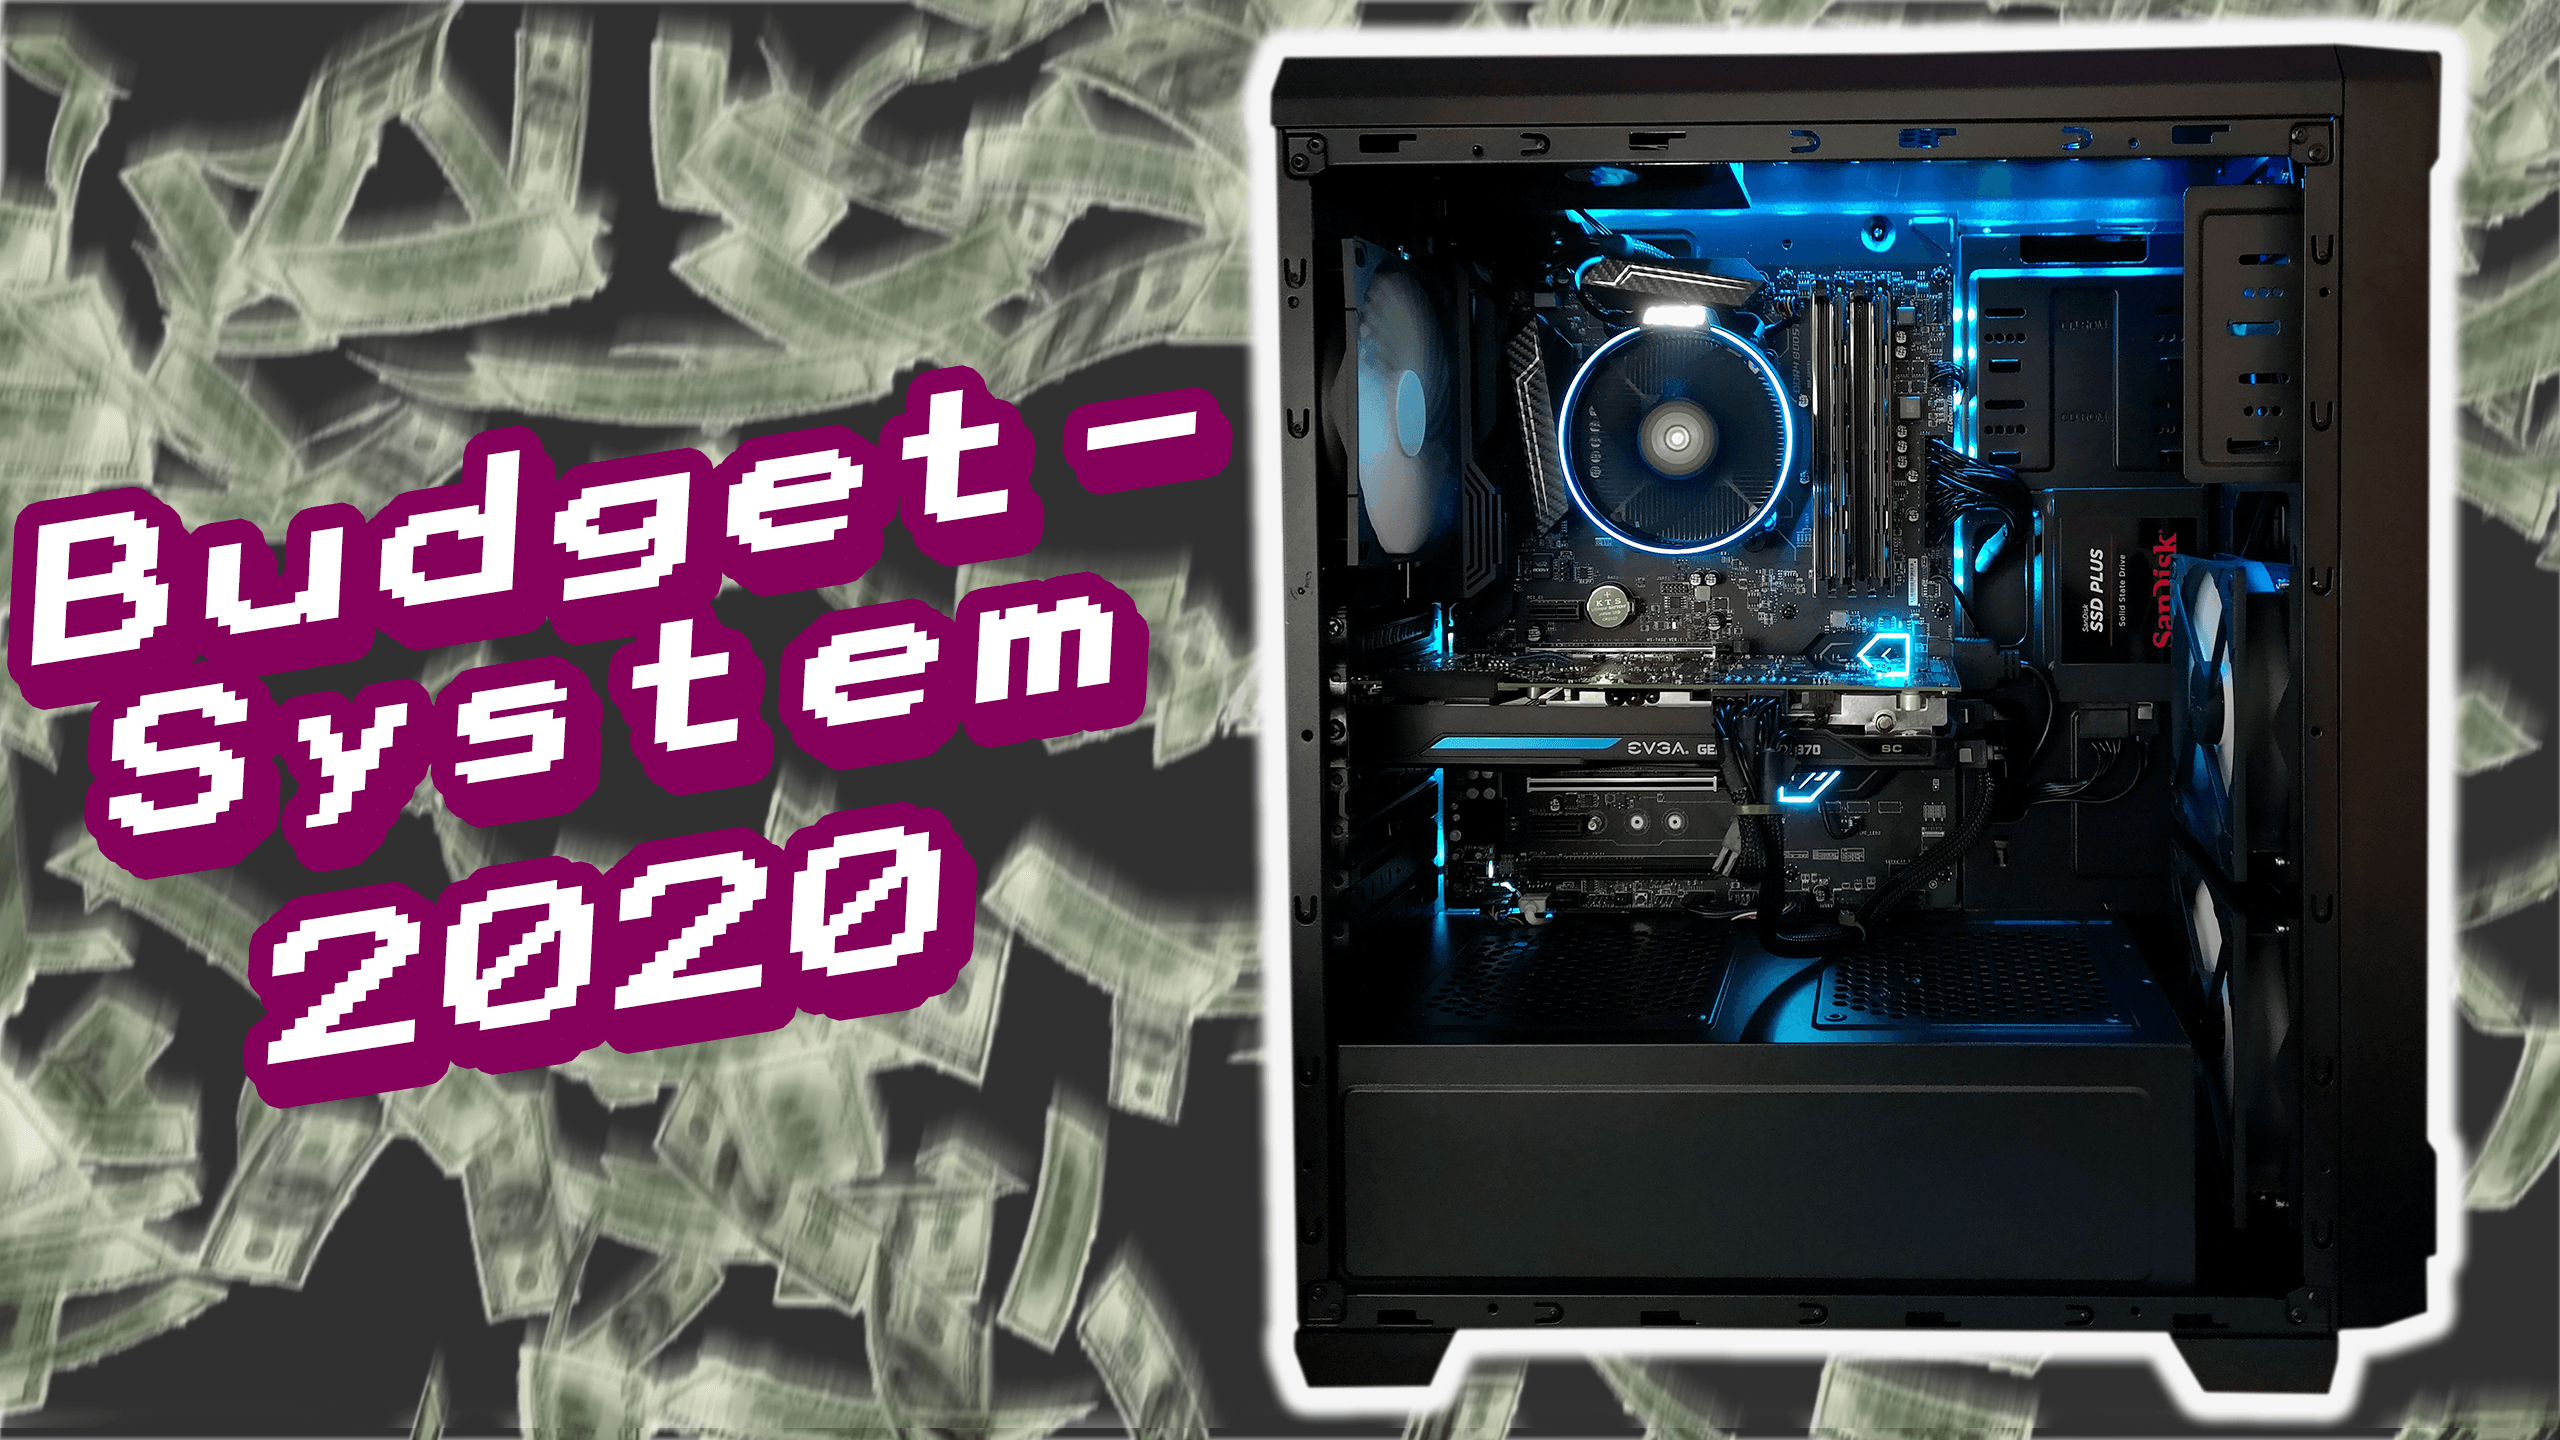 Low-Budget Gaming PC 2020 - What do you get for 400 Euros?